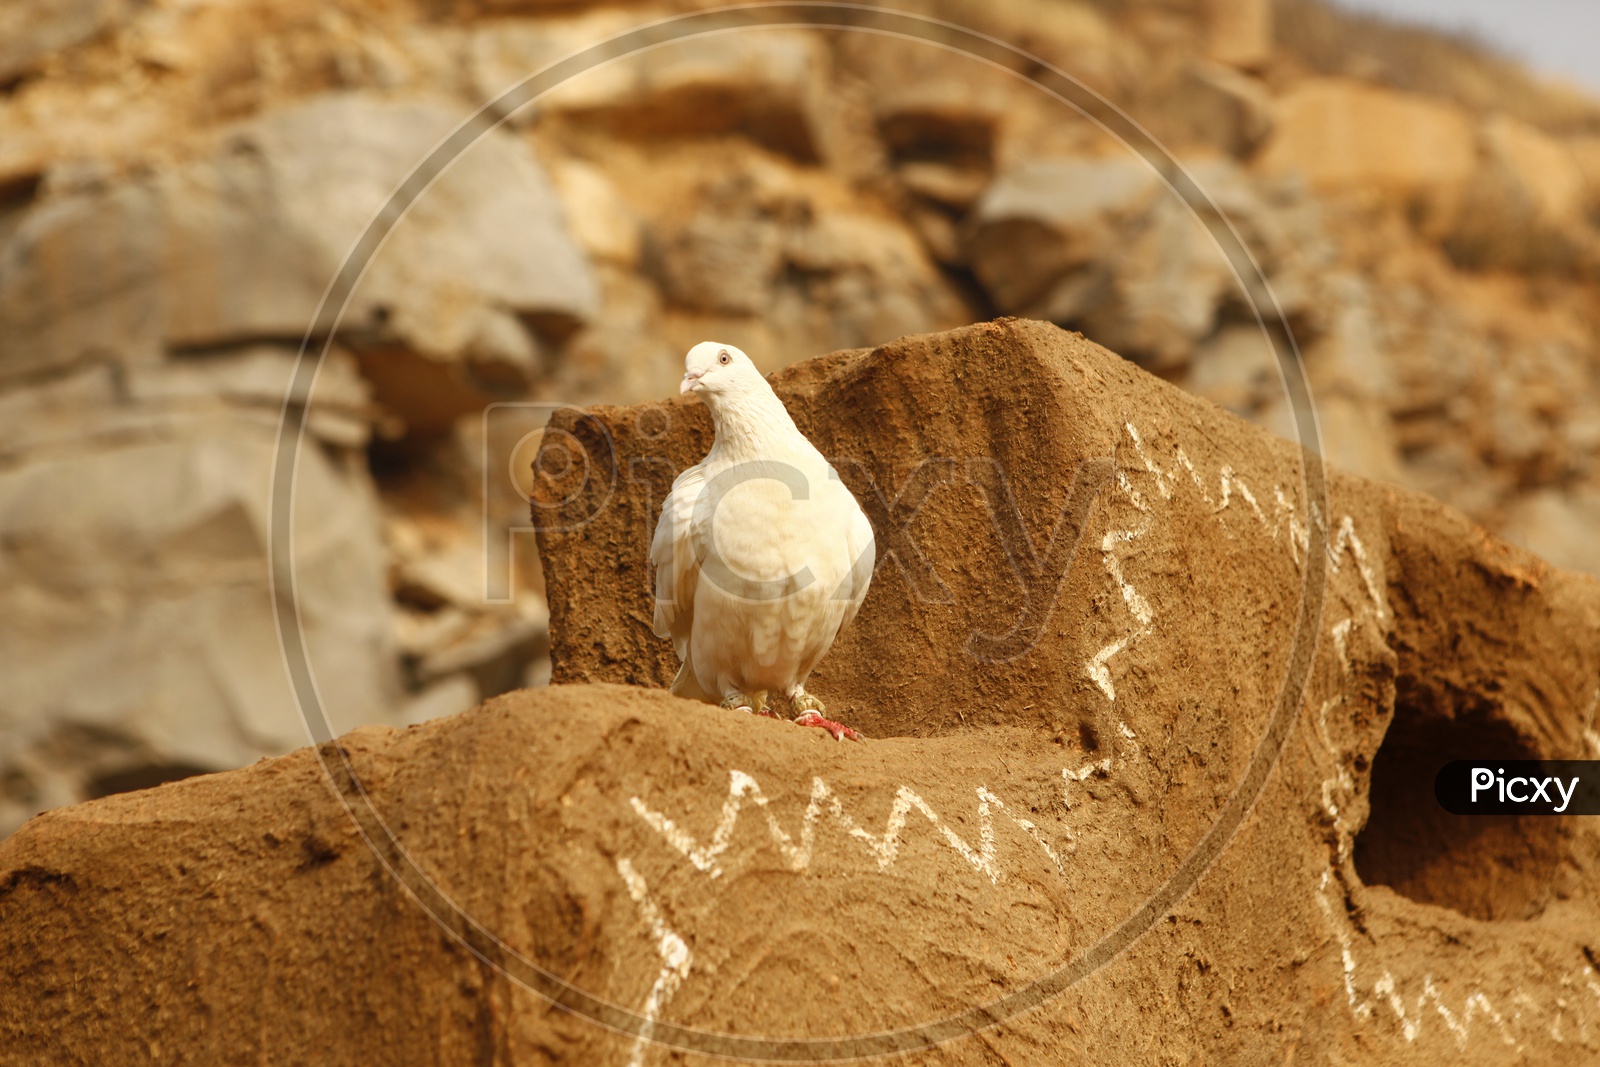 A Dove resting on the mud block